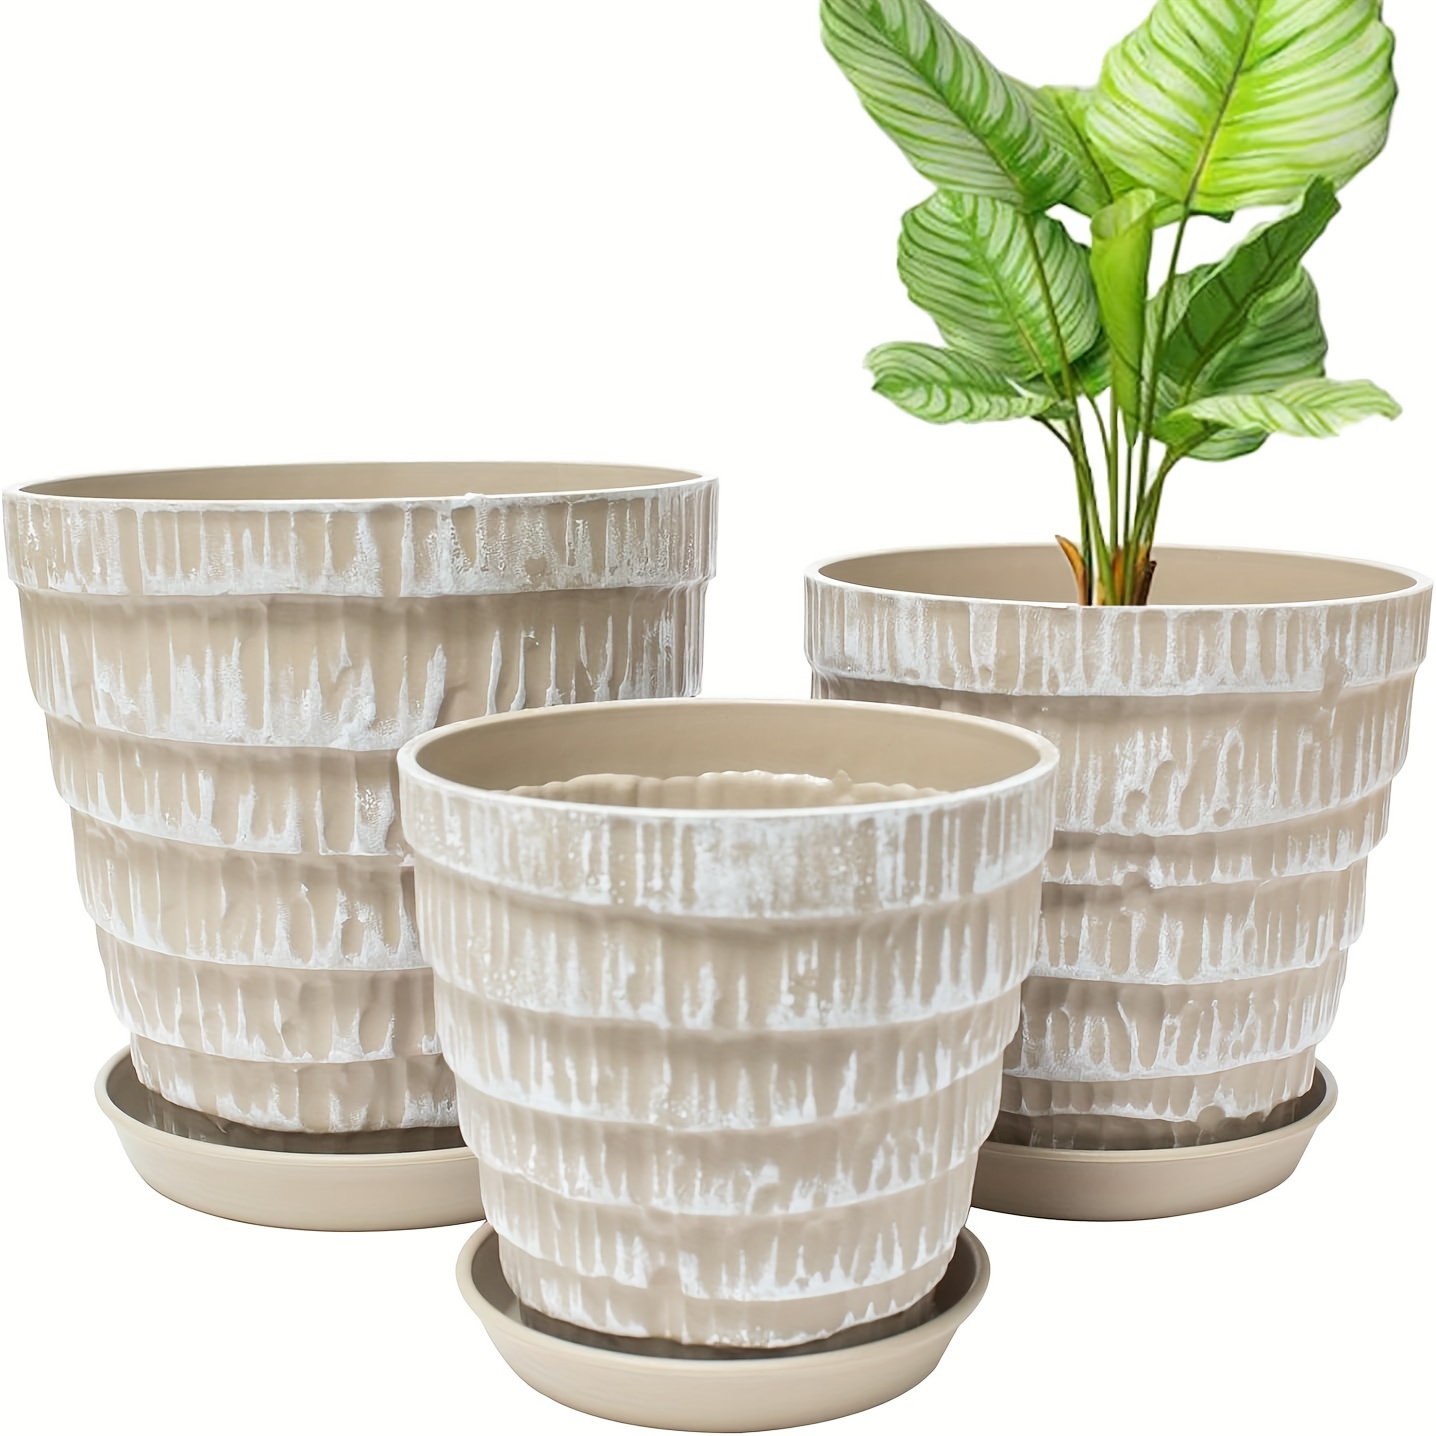 

Casual Striped Plastic Plant Pots Set Of 3 With Drainage Holes & Saucers - Weather Resistant Round Flower Pots For Indoor And Outdoor Use, Includes Lacquered Finish & Tabletop Mounting Type